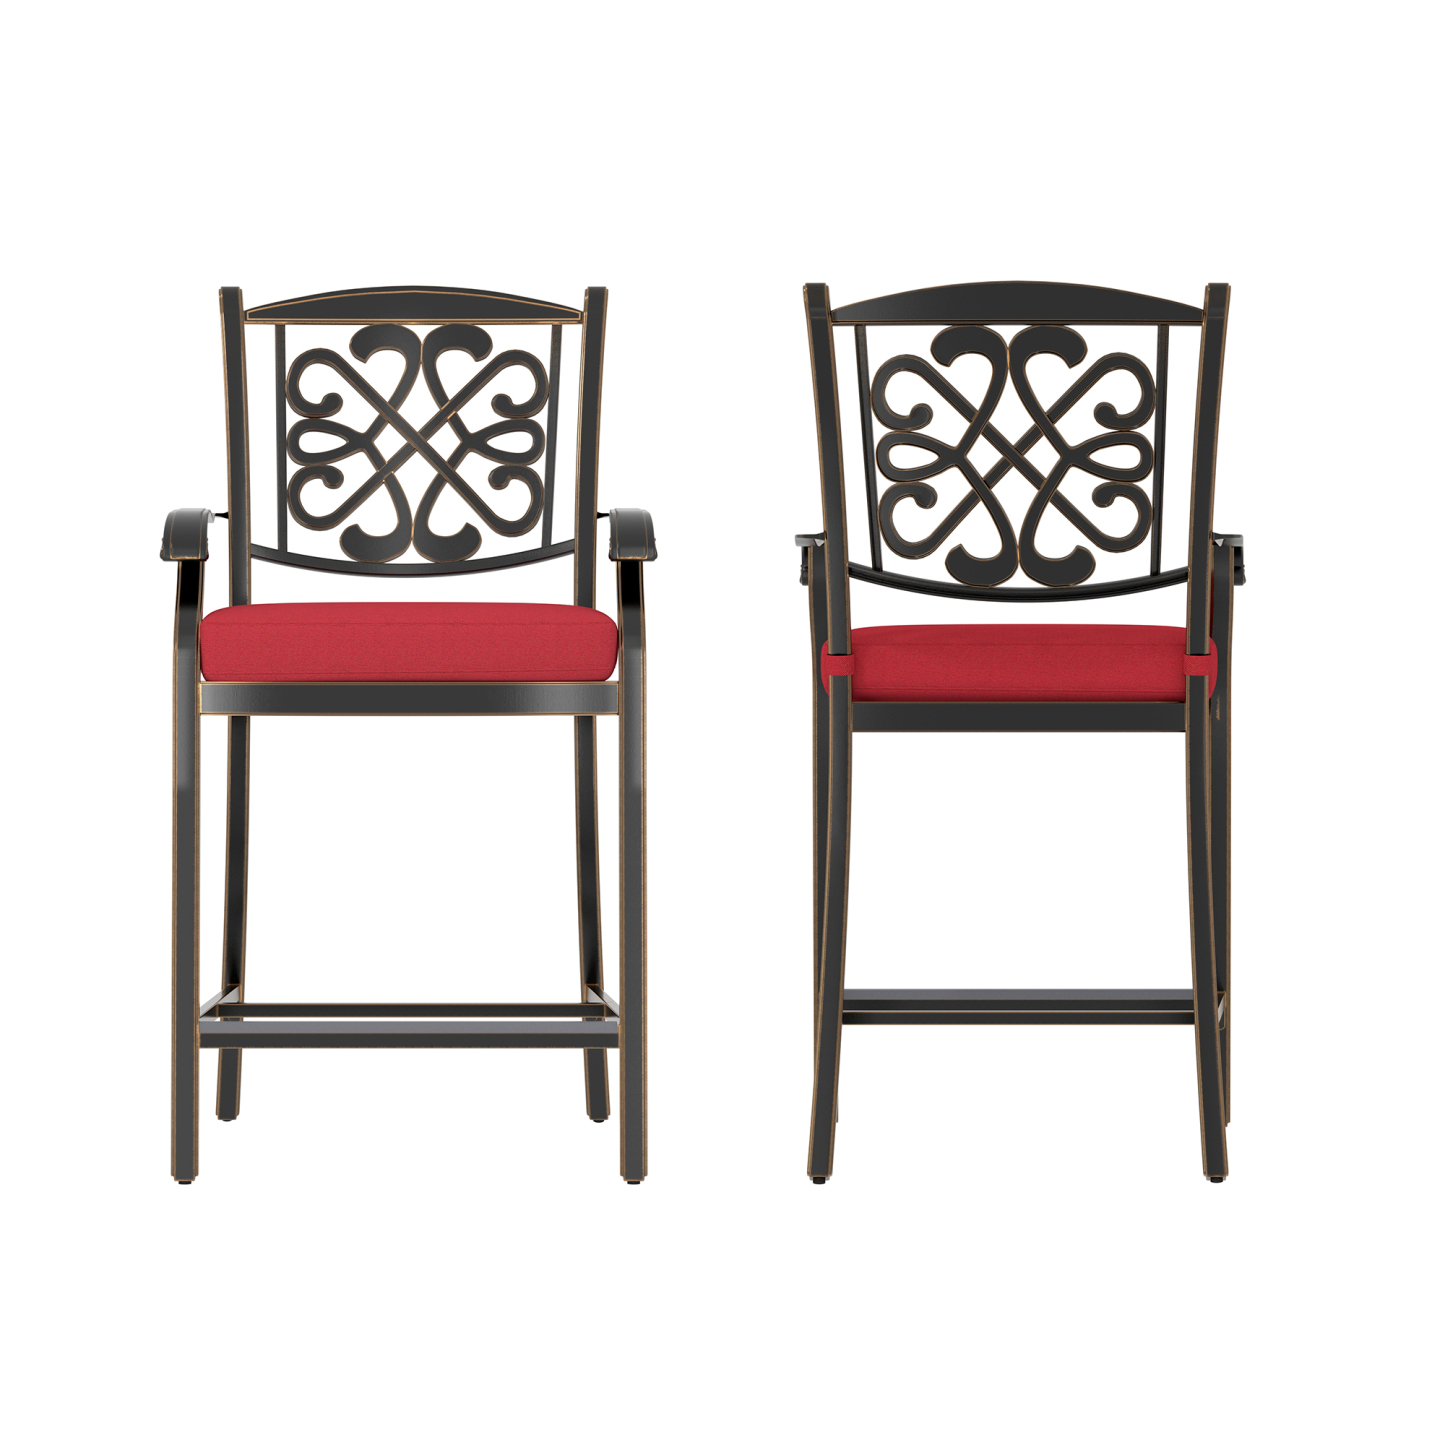 Mondawe 4 Pieces Cast Aluminum Diamond-Mesh Curved Backrest Dining Bar High Chairs In Red/Beige-Mondawe